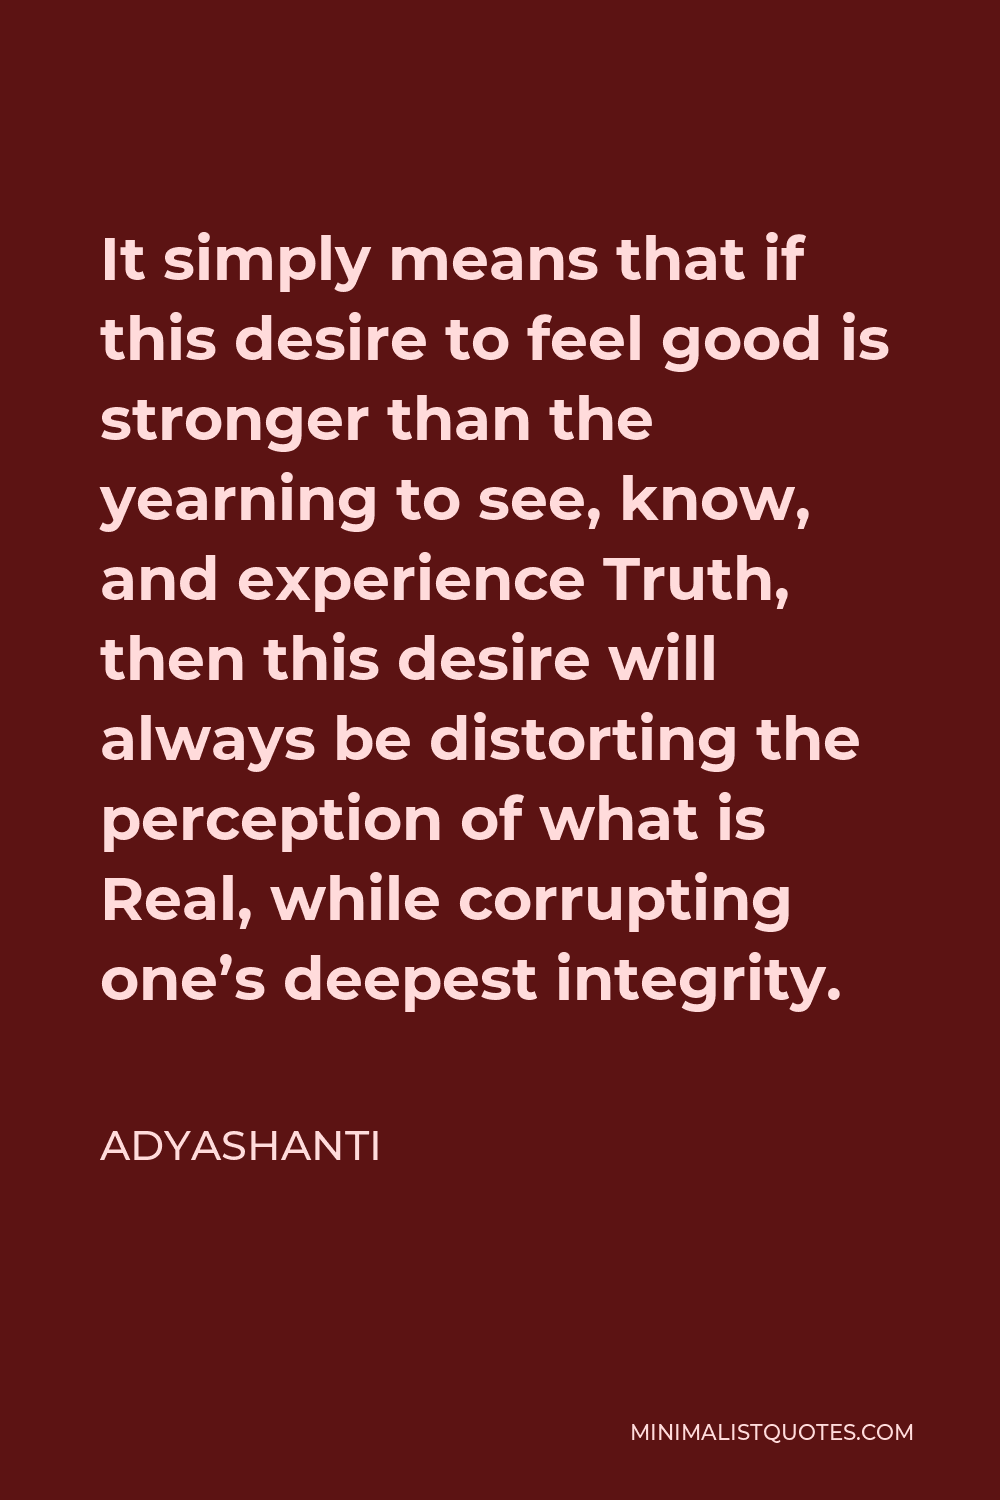 Adyashanti Quote - It simply means that if this desire to feel good is stronger than the yearning to see, know, and experience Truth, then this desire will always be distorting the perception of what is Real, while corrupting one’s deepest integrity.